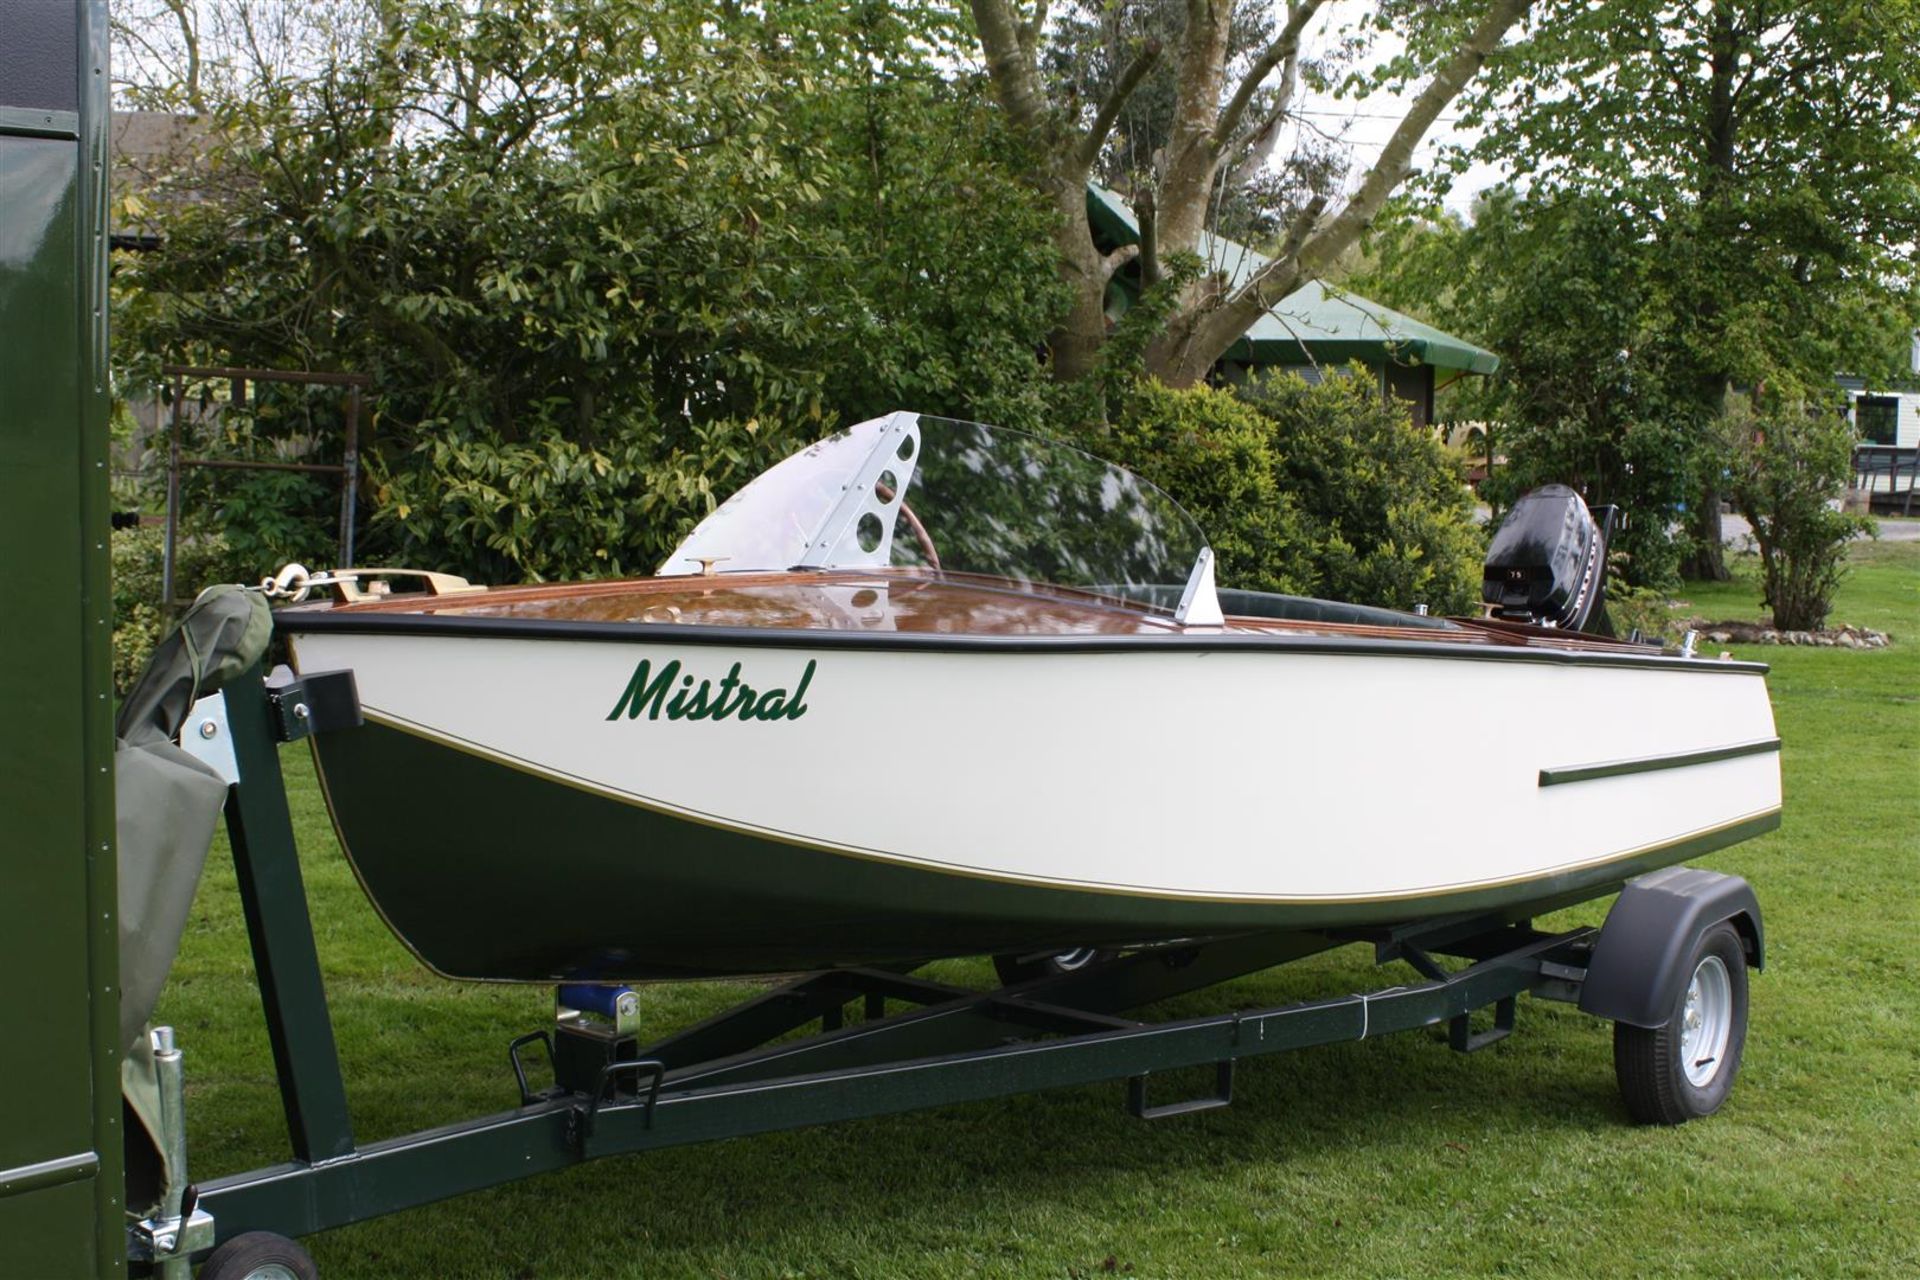 1954/5 Four seat twin cockpit river launch 'Mistral' with restored 7.5hp Mercury outboard.